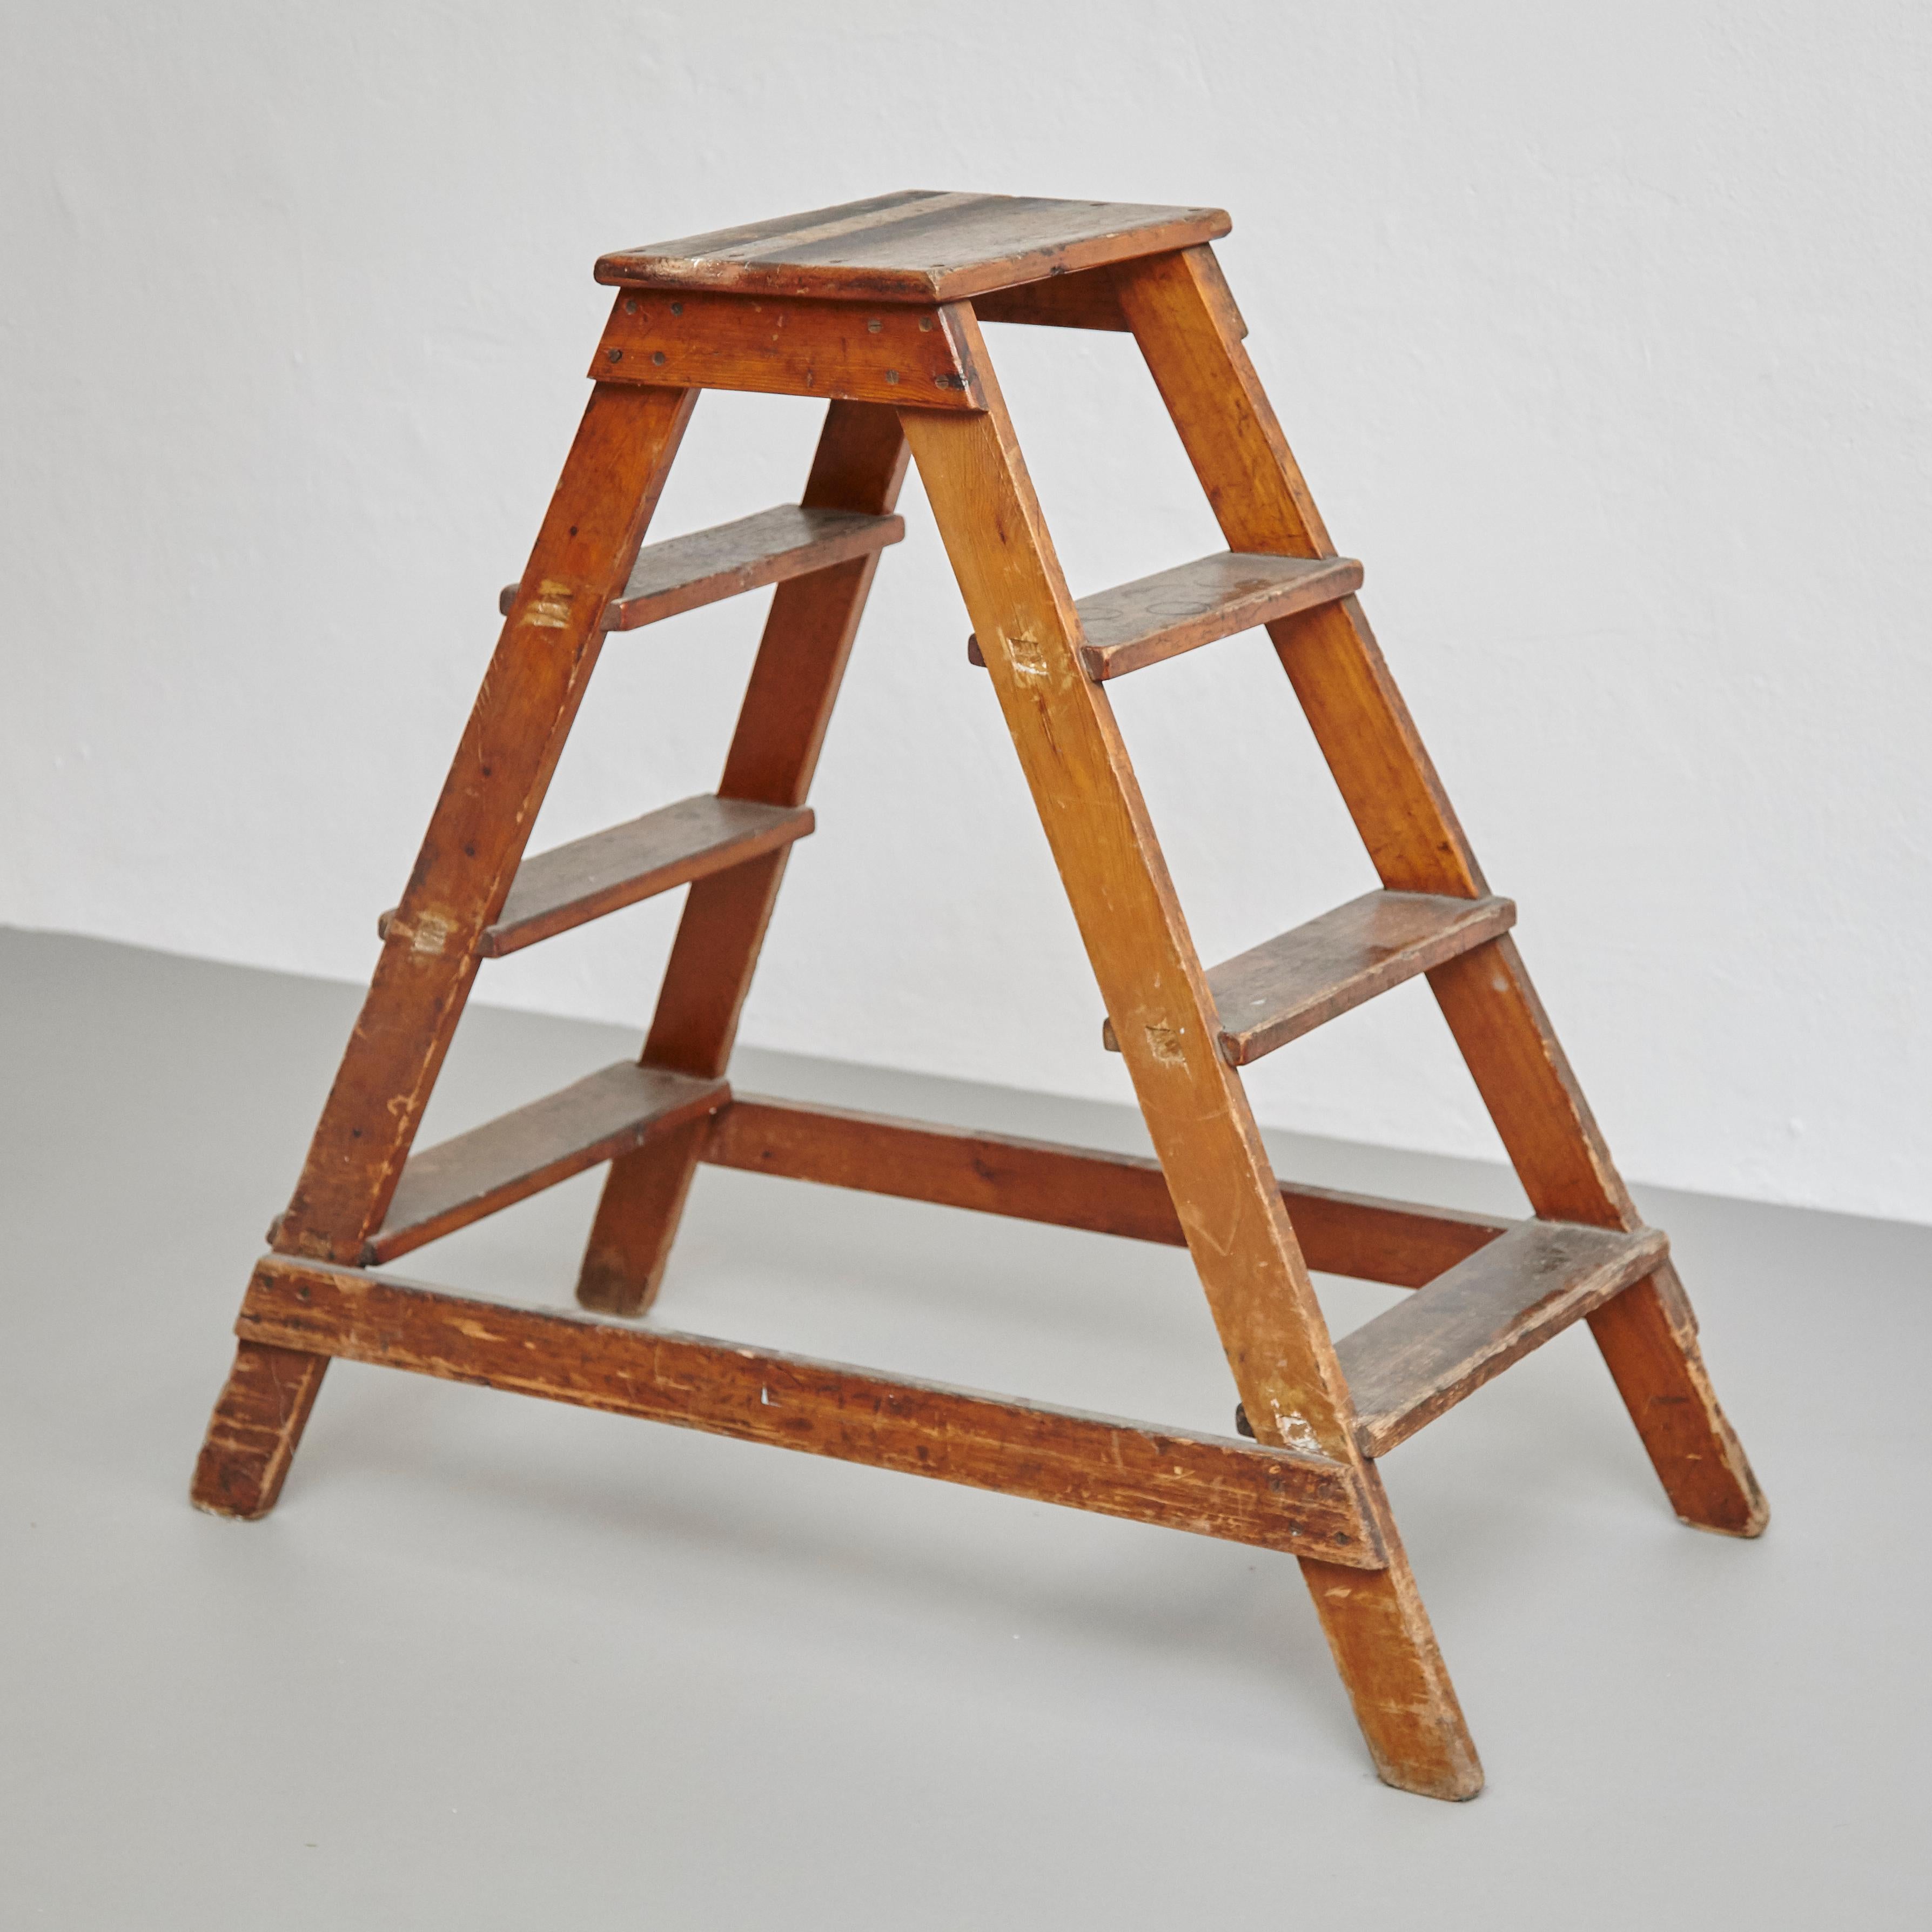 Rationalist stairs in wood.
By unknown manufacturer, circa 1940, Spain.

In original condition, with minor wear consistent with age and use, preserving a beautiful patina.

Materials:
Wood

Dimensions:
D 49 cm x W 109 cm x H 96 cm.